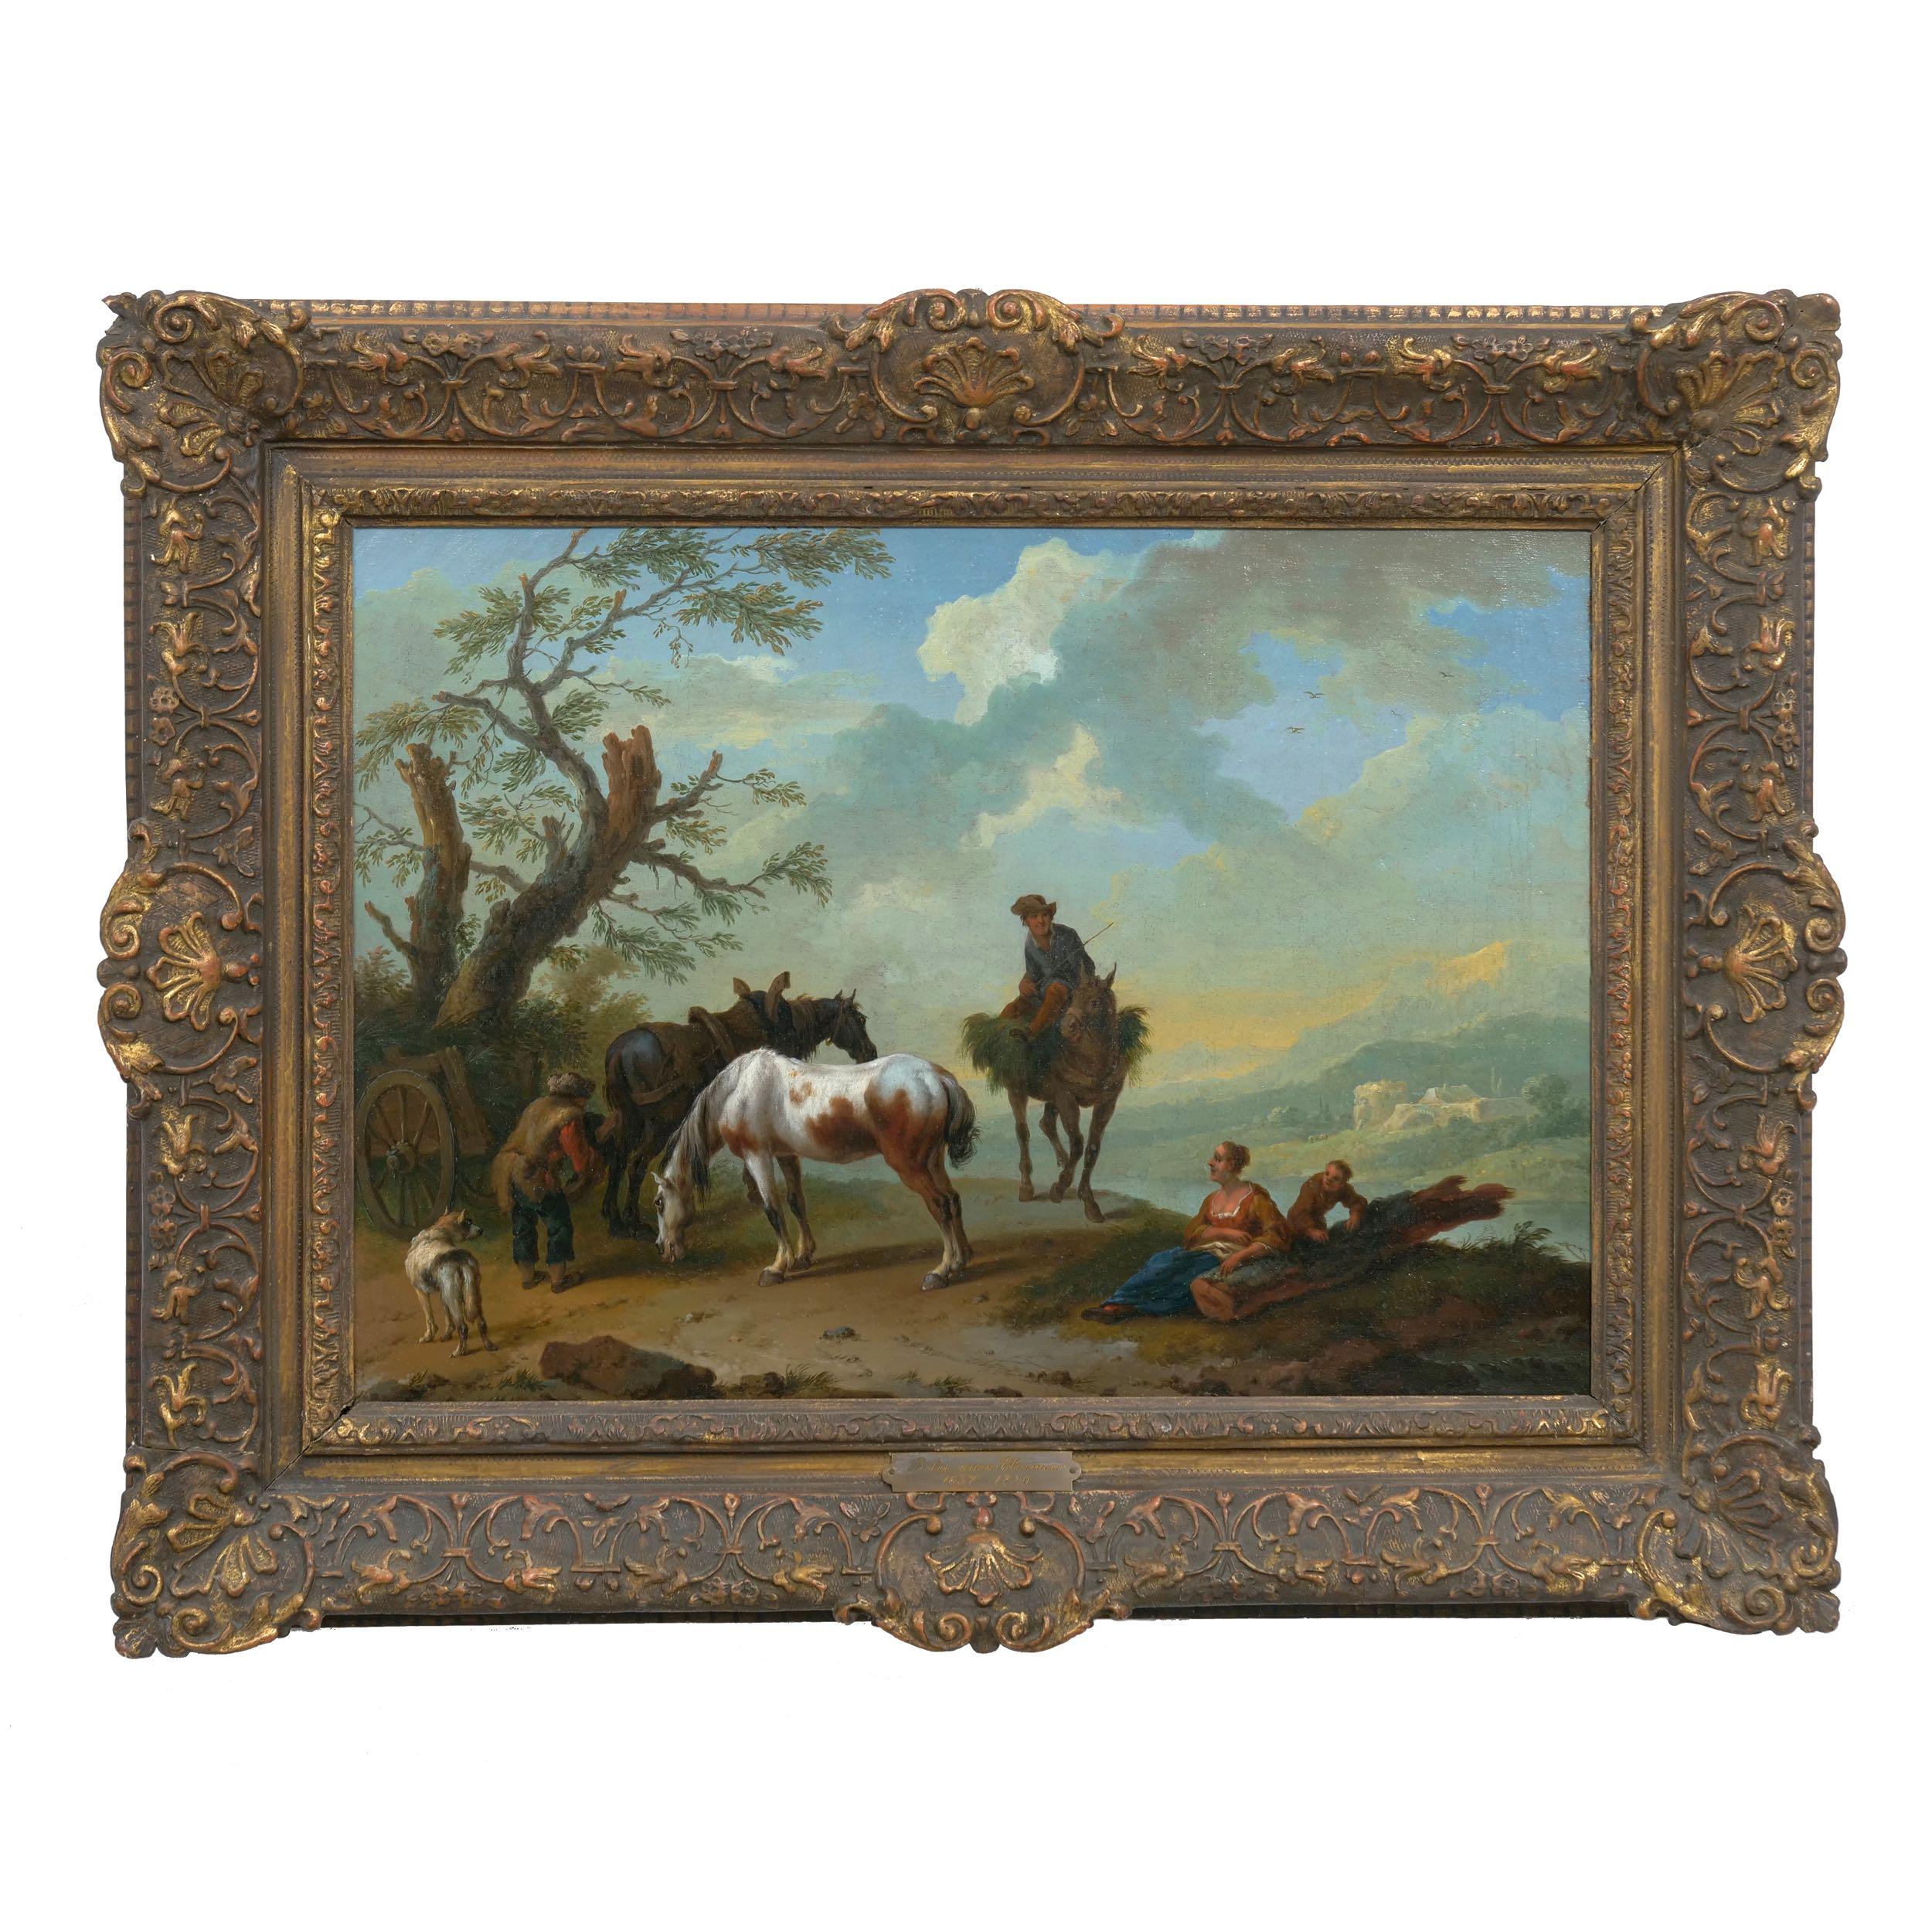 Oiled Antique Landscape Paintings Attributed to Pieter van Bloemen, 18th Century, Pair For Sale